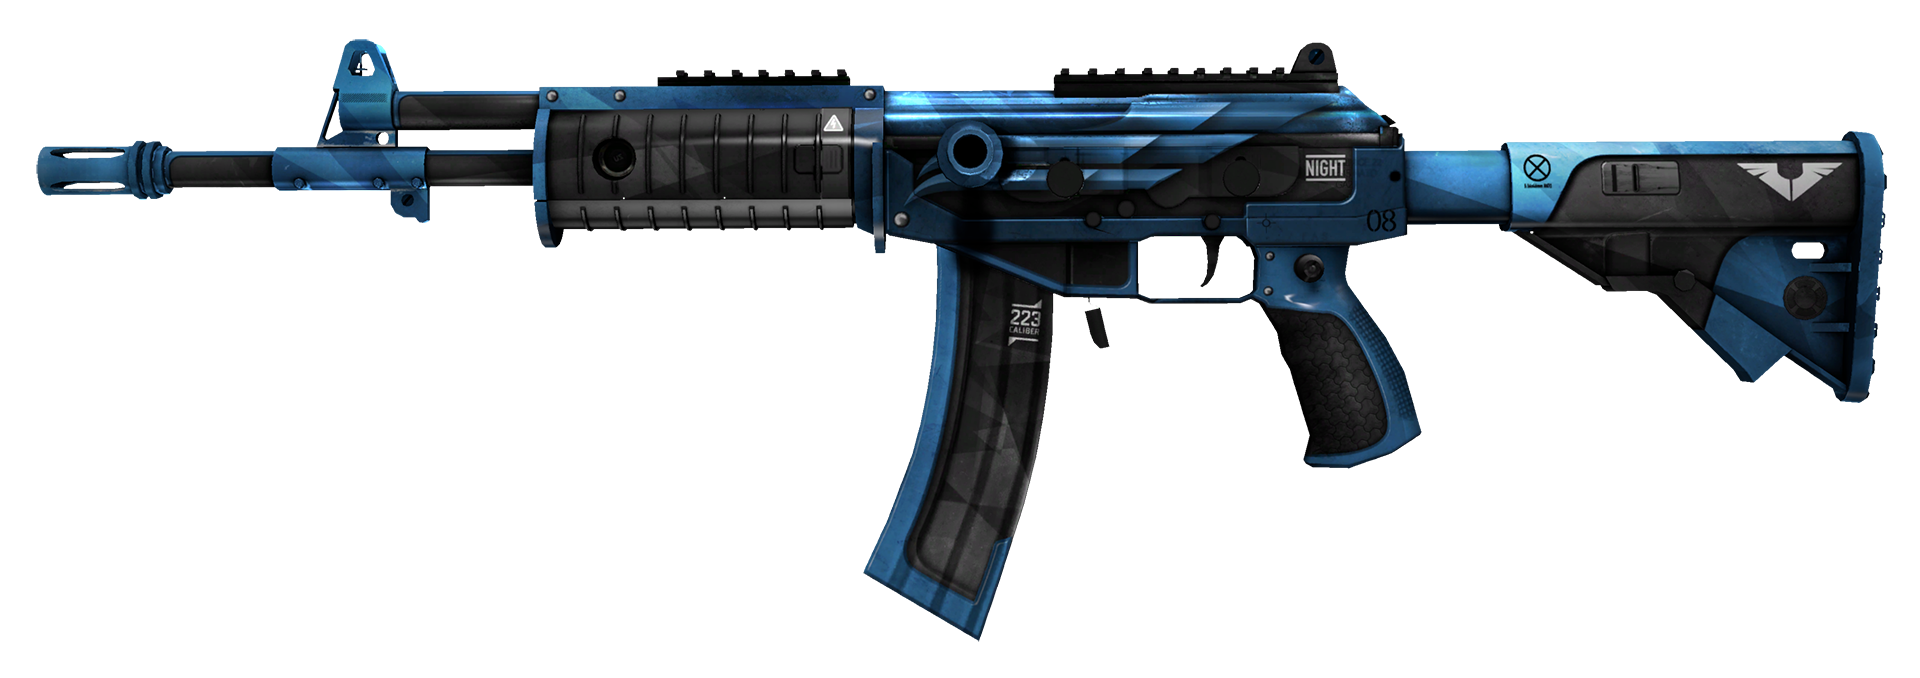 Galil AR Stone Cold Large Rendering